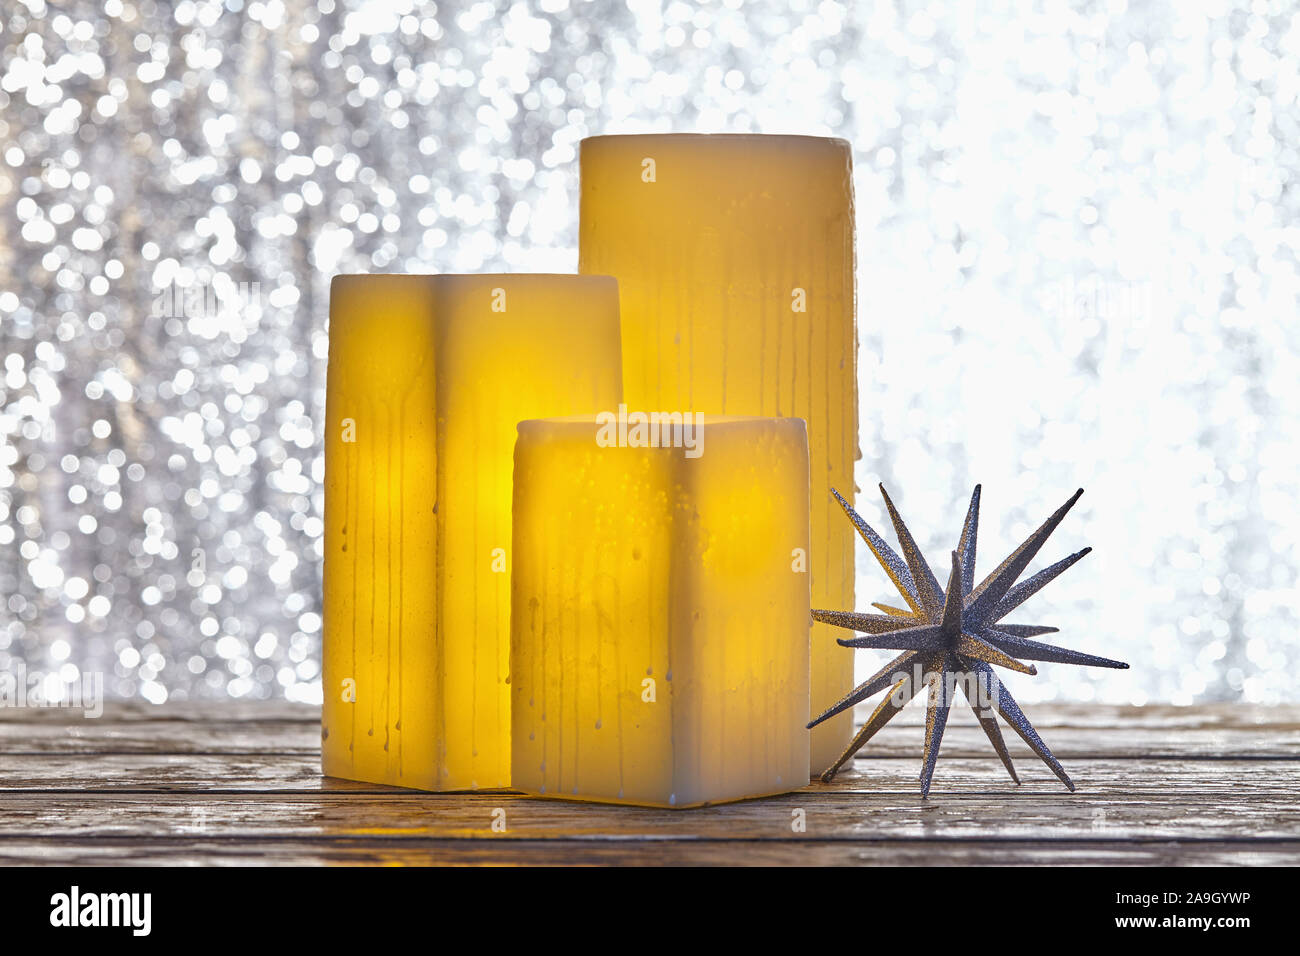 Winter holiday Christmas still life of glowing  electric square candles and star holiday ornament Stock Photo